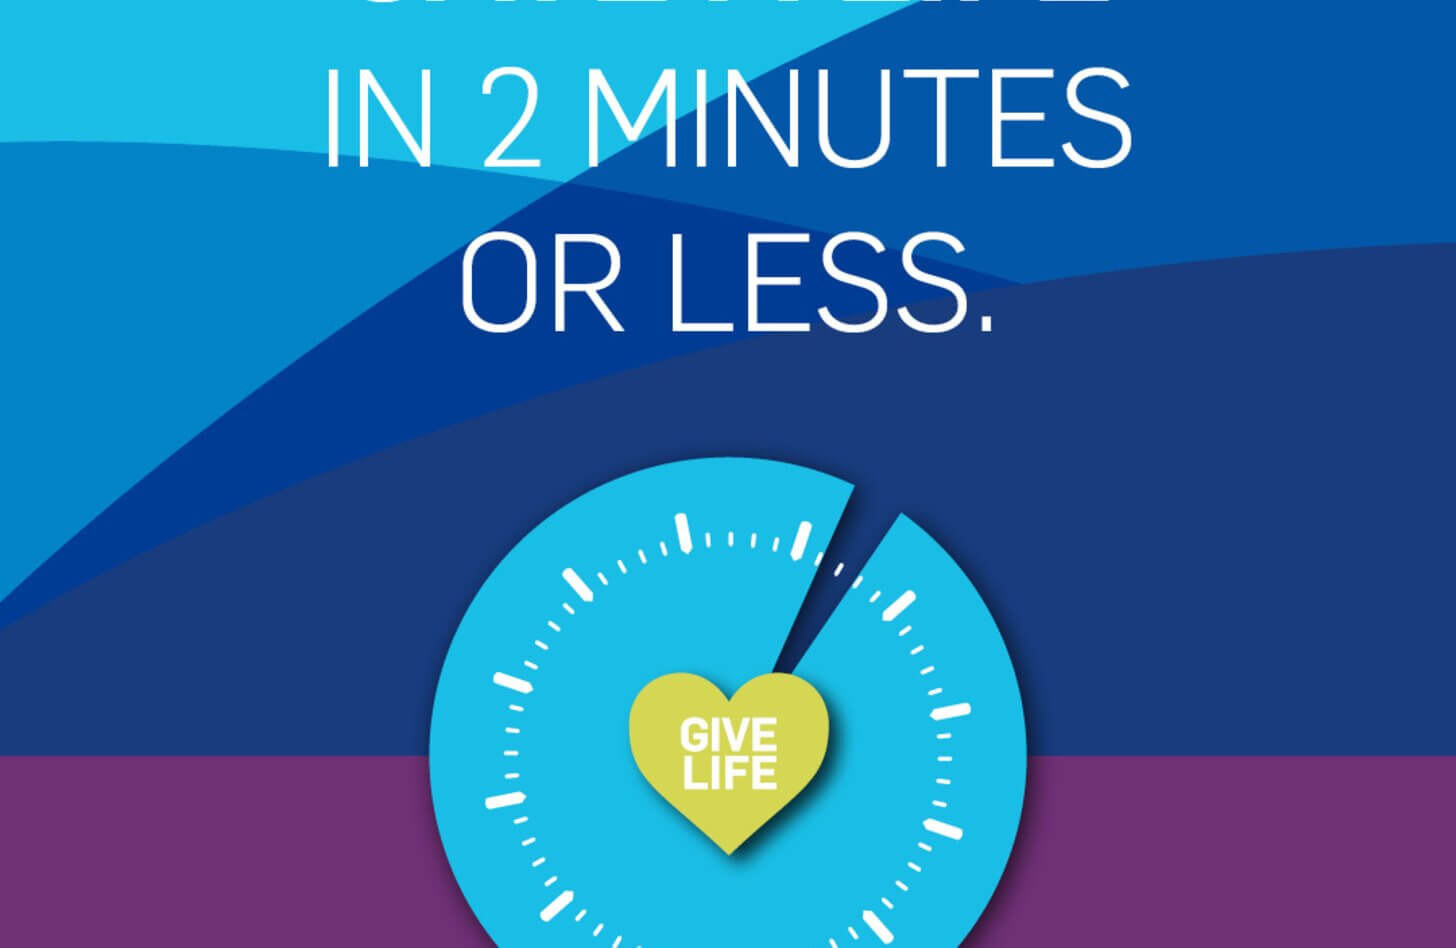 Picture of a clock. Text says "Save a life in two minutes or less"